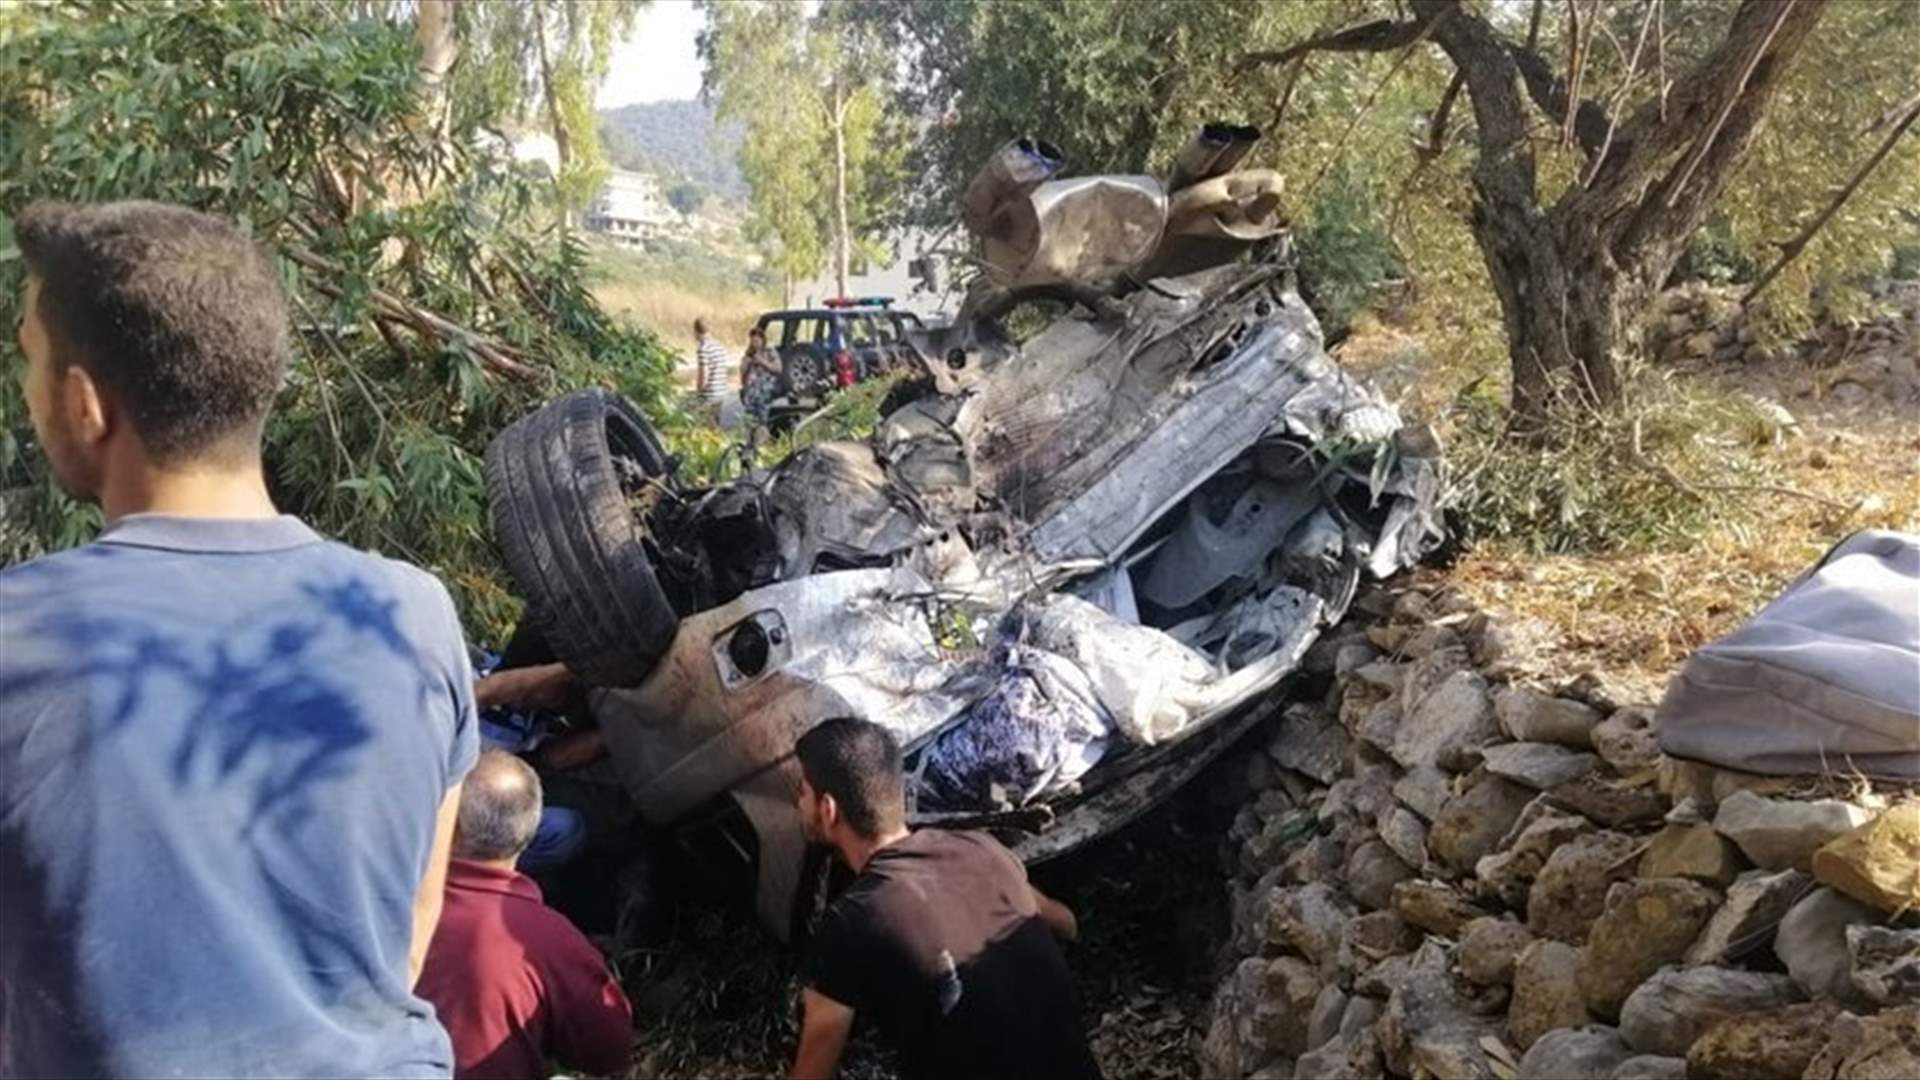 One killed, 3 injured in horrific road accident on Ehden highway